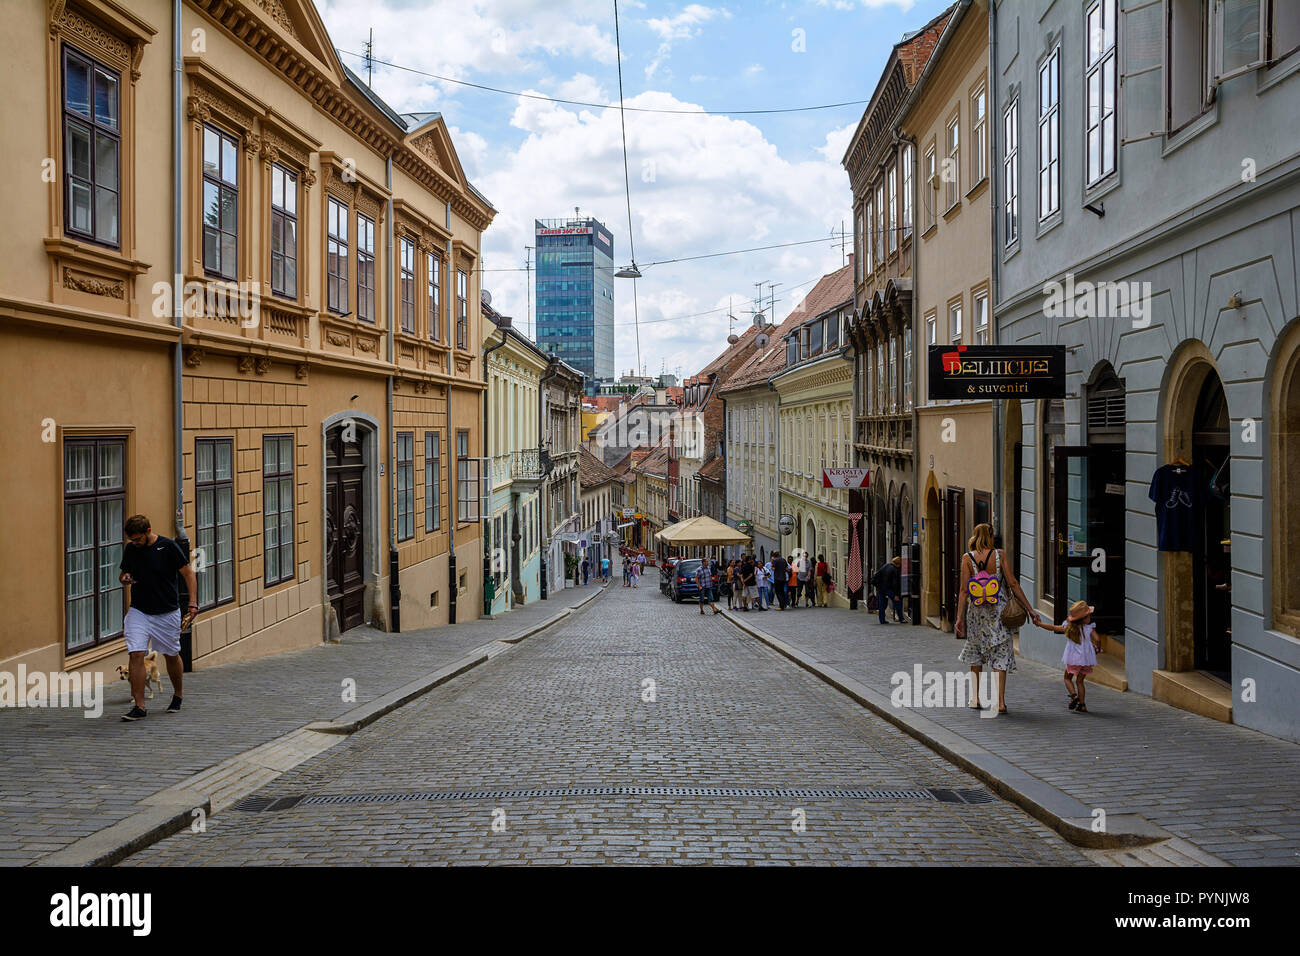 ZAGREB, CROATIA - JULY 15, 2017. Street view and architecture buildings of Ilica - Radiceva street in the Old town of Zagreb, Croatia Stock Photo